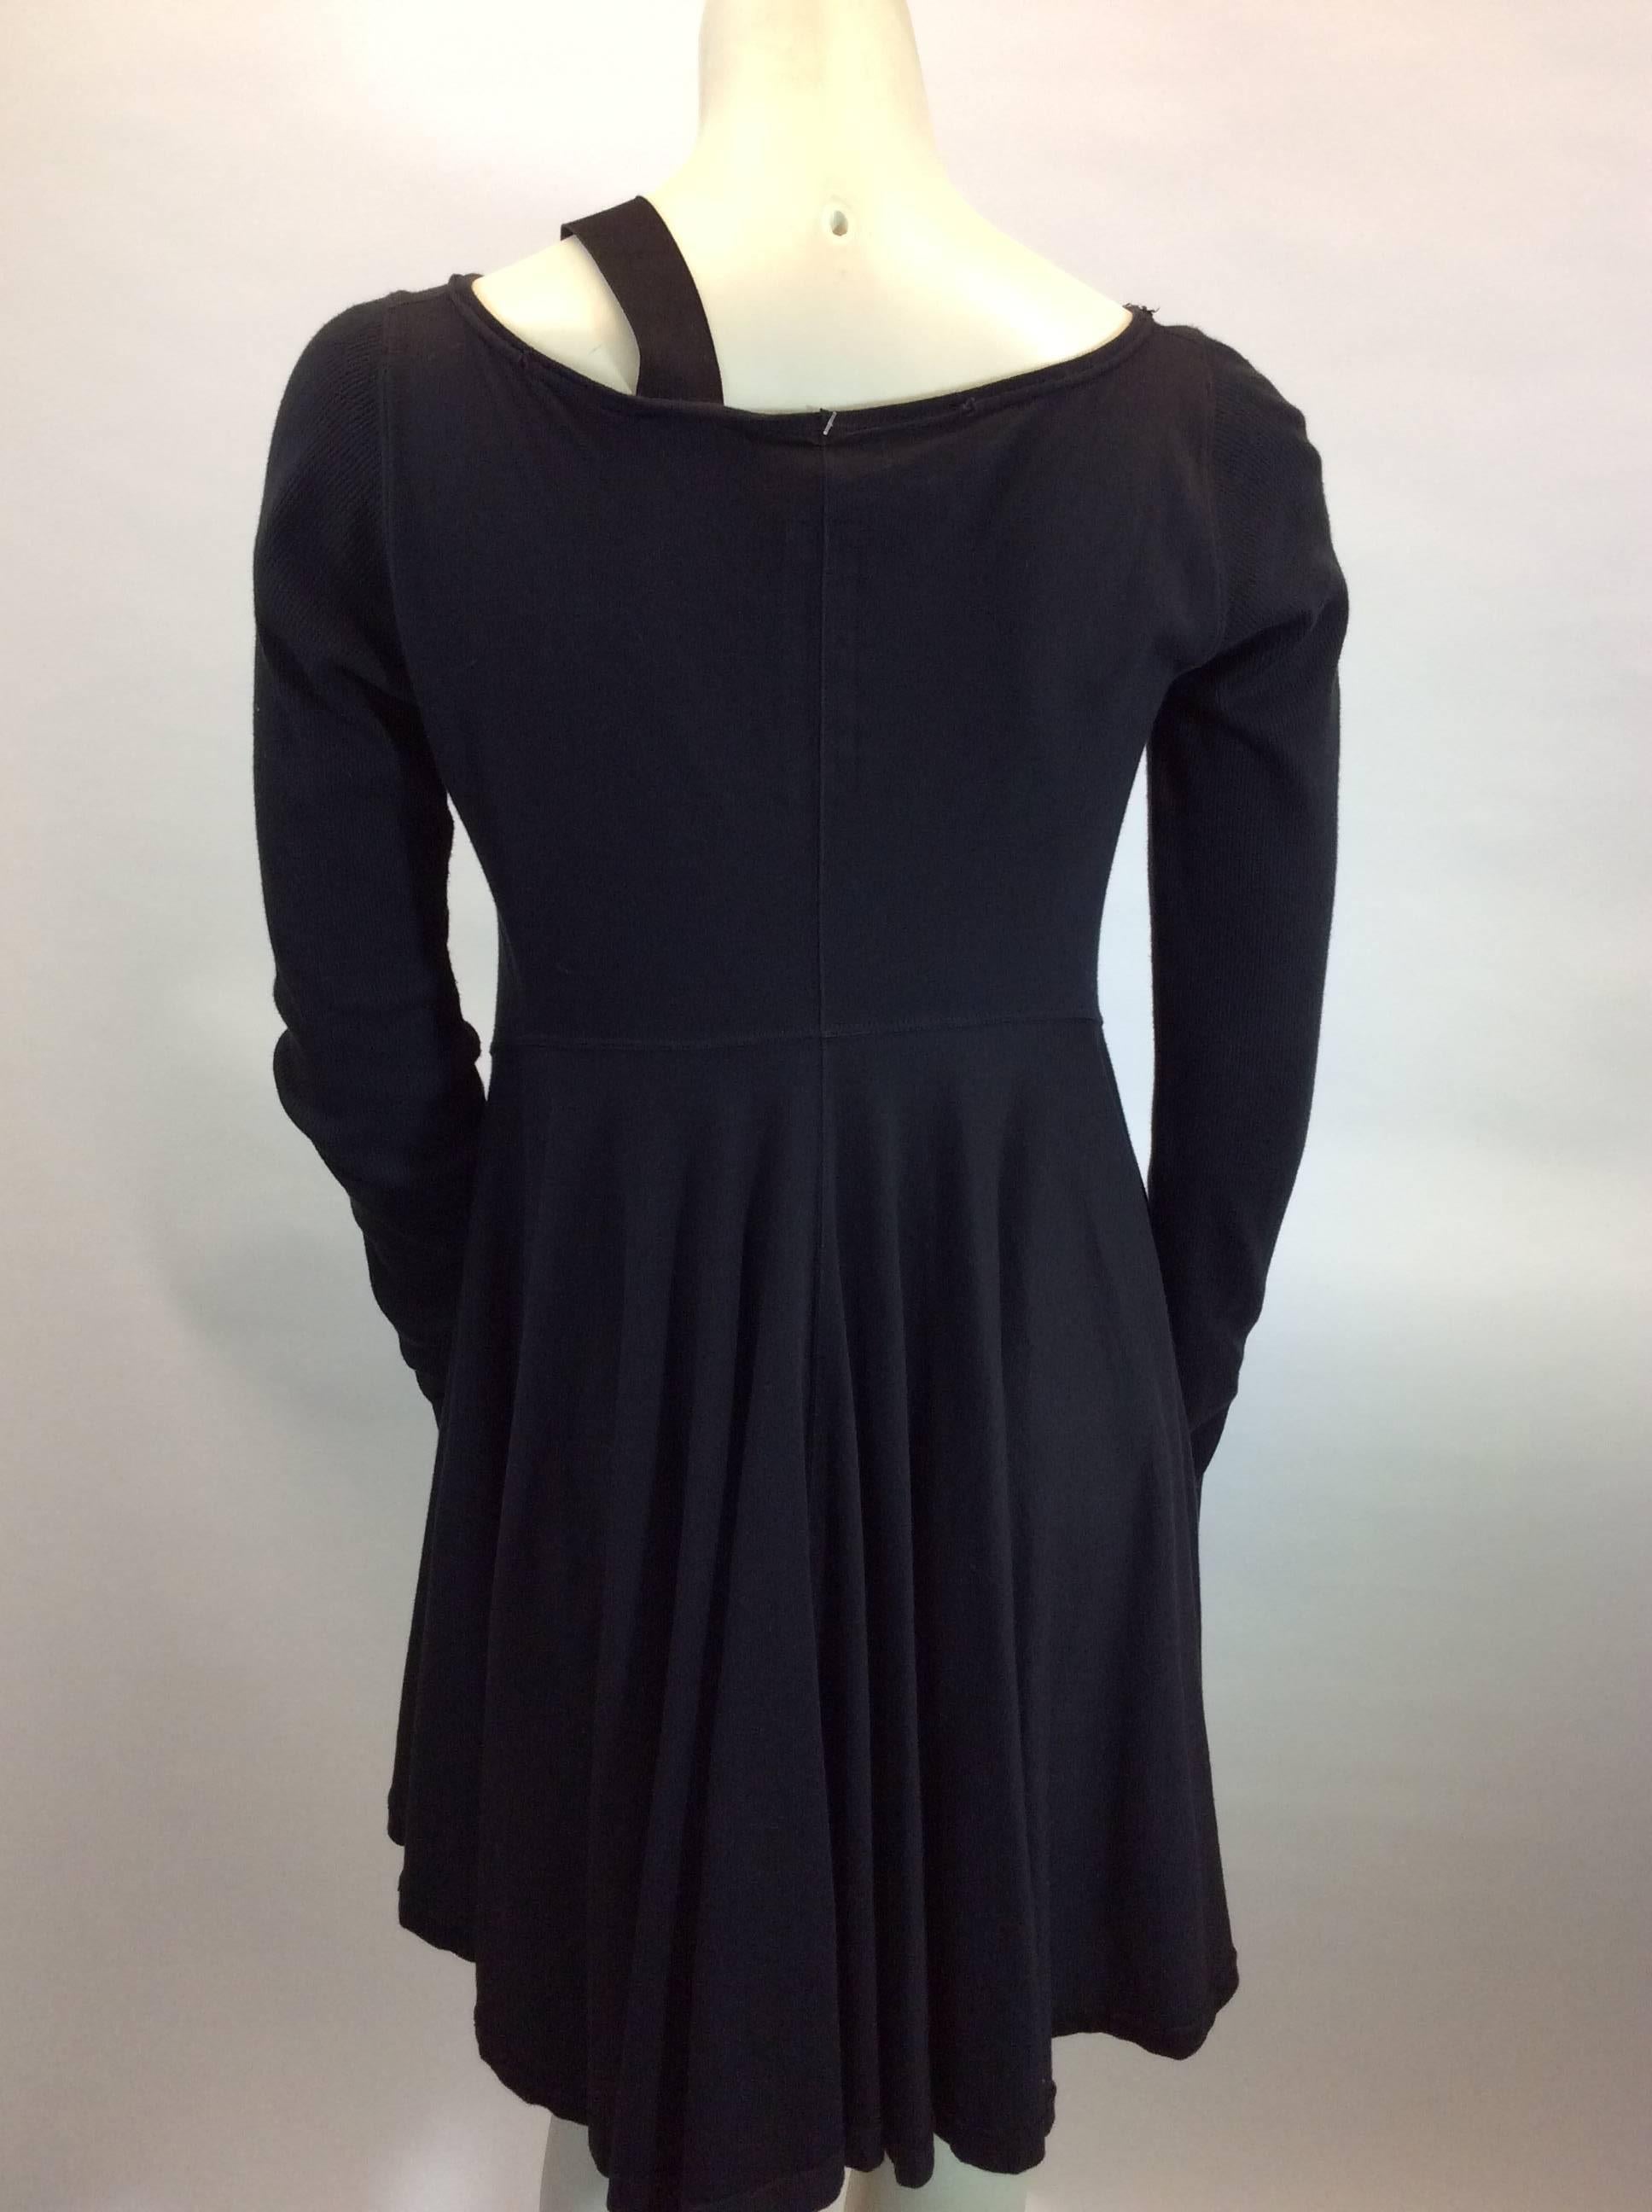 Rick Owens Black Knit Dress with Strap Detail In Excellent Condition For Sale In Narberth, PA